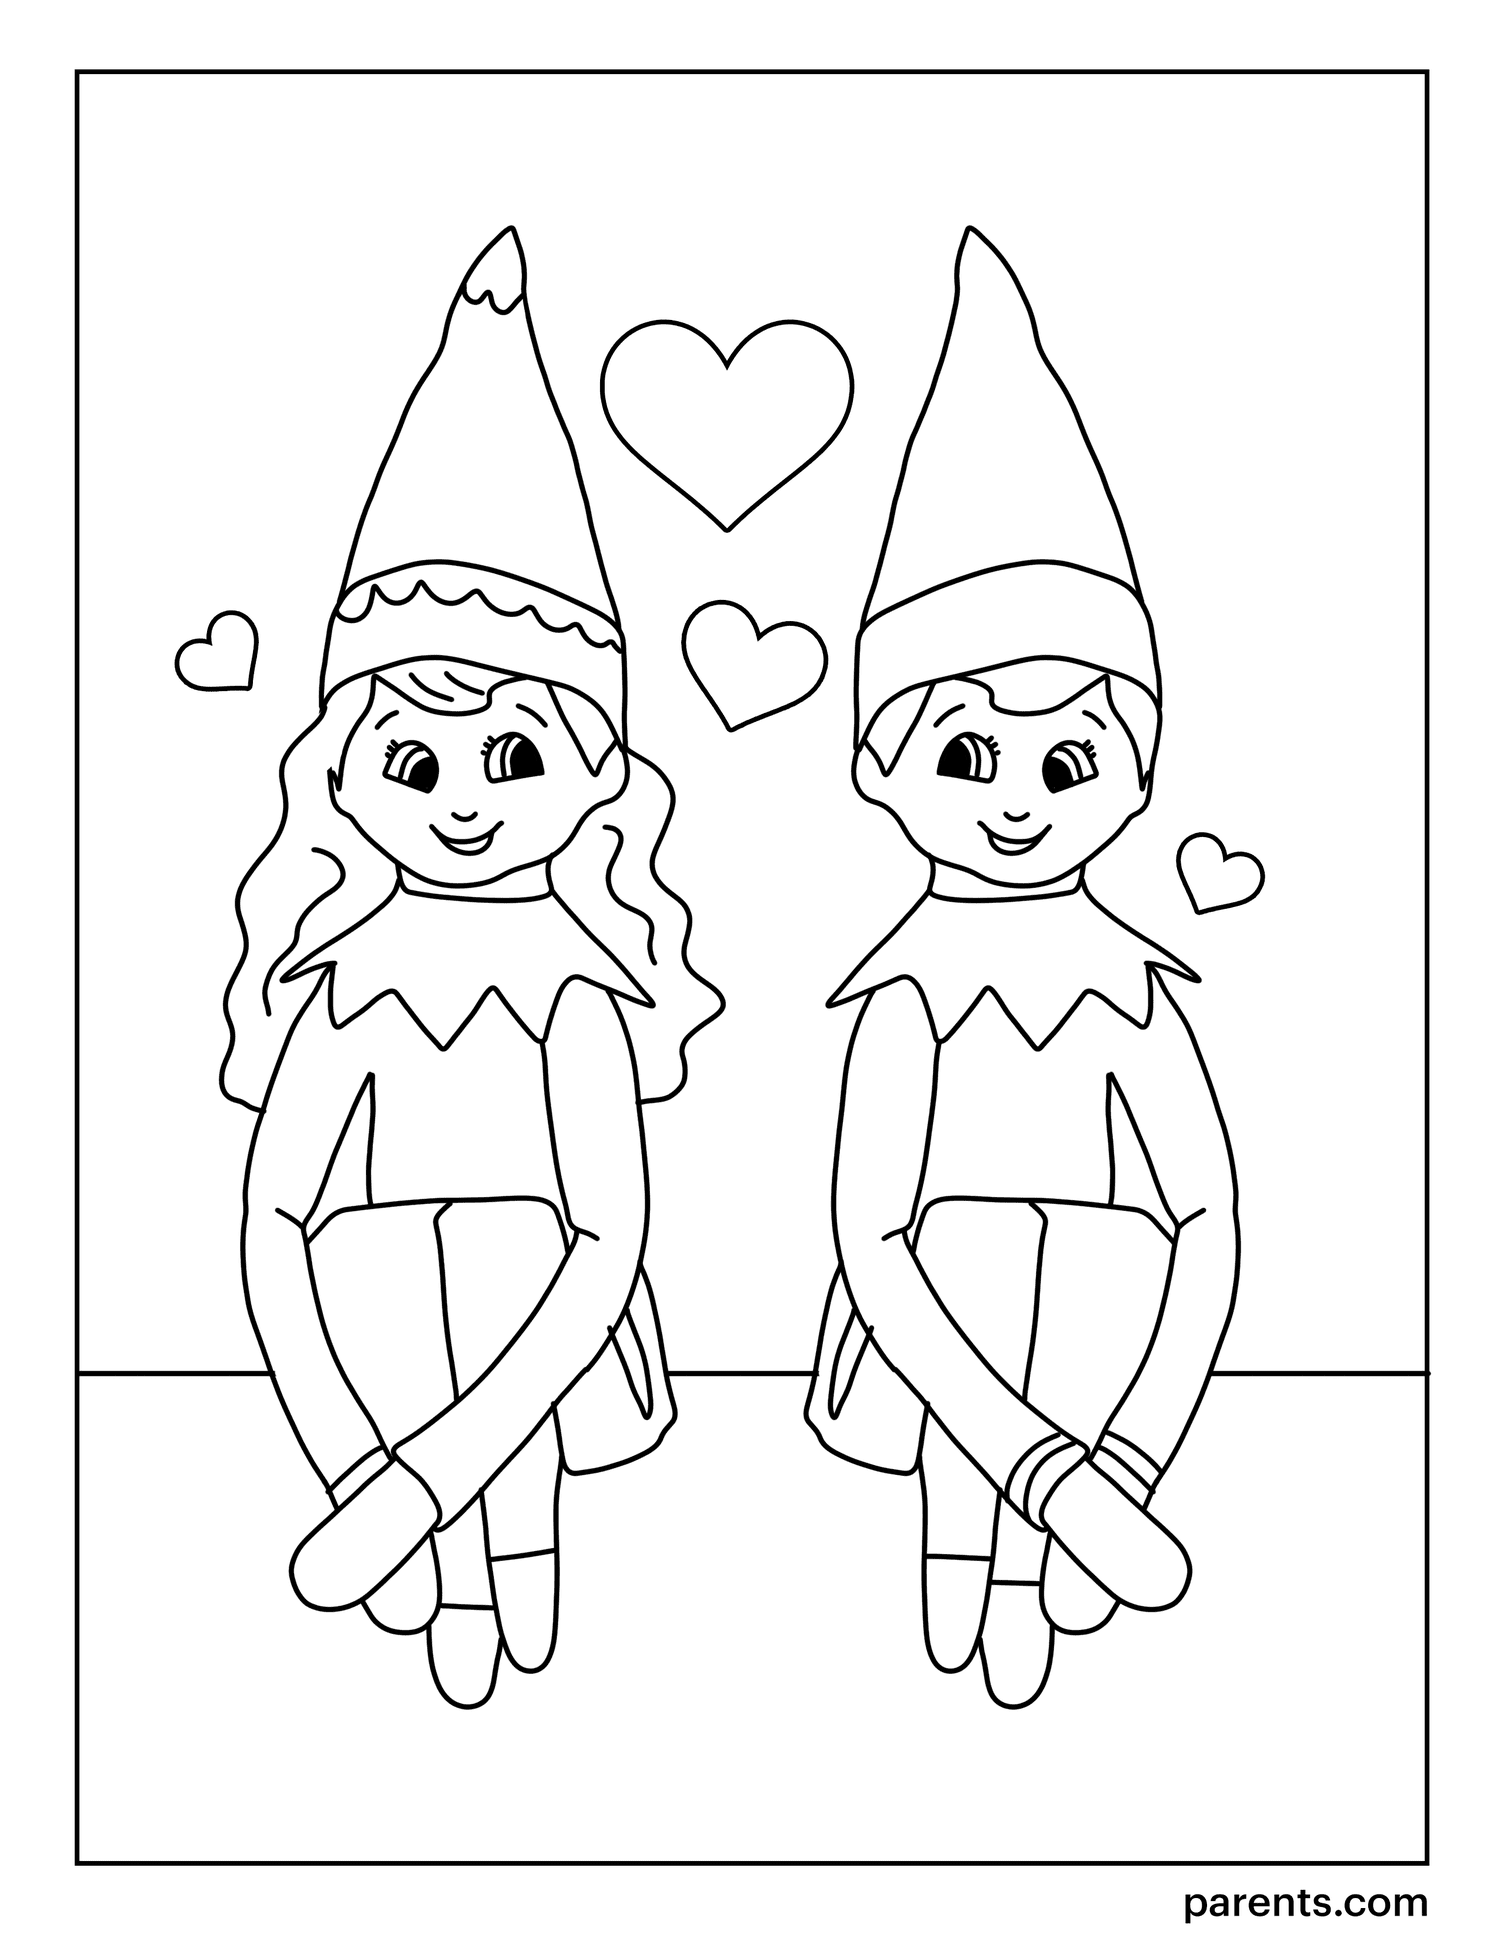 Elf On The Shelf Printable Pages Coloring Pages